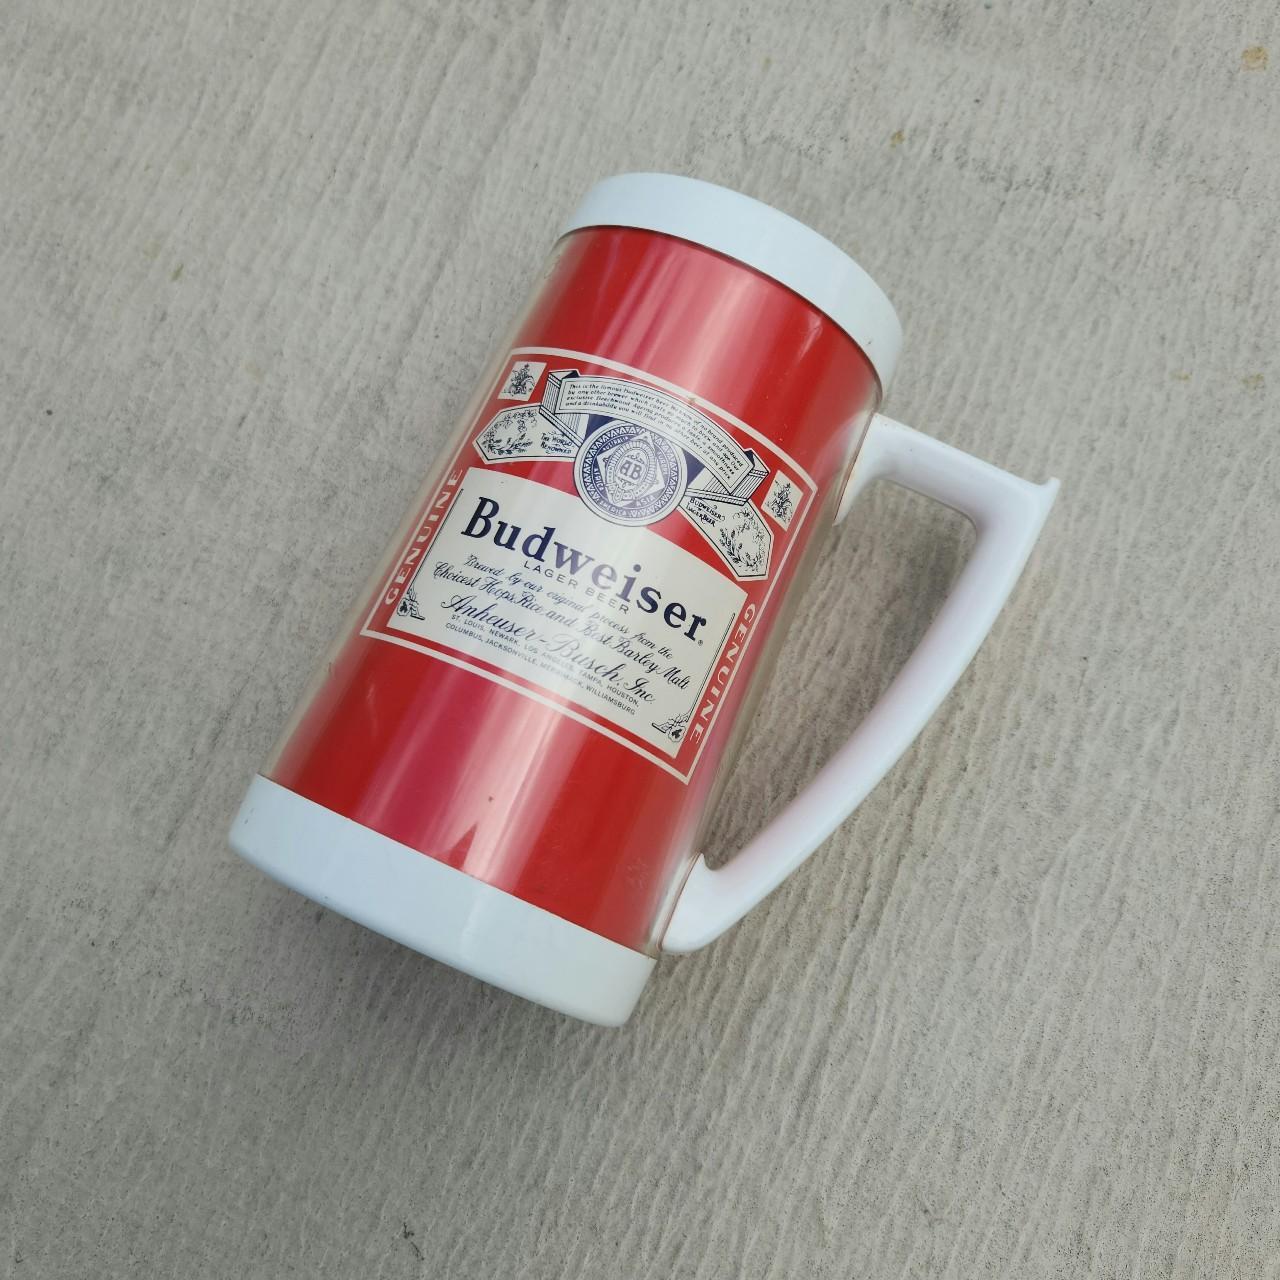 Vintage Budweiser Thermo-serv Plastic Beer Stein or Mug From the